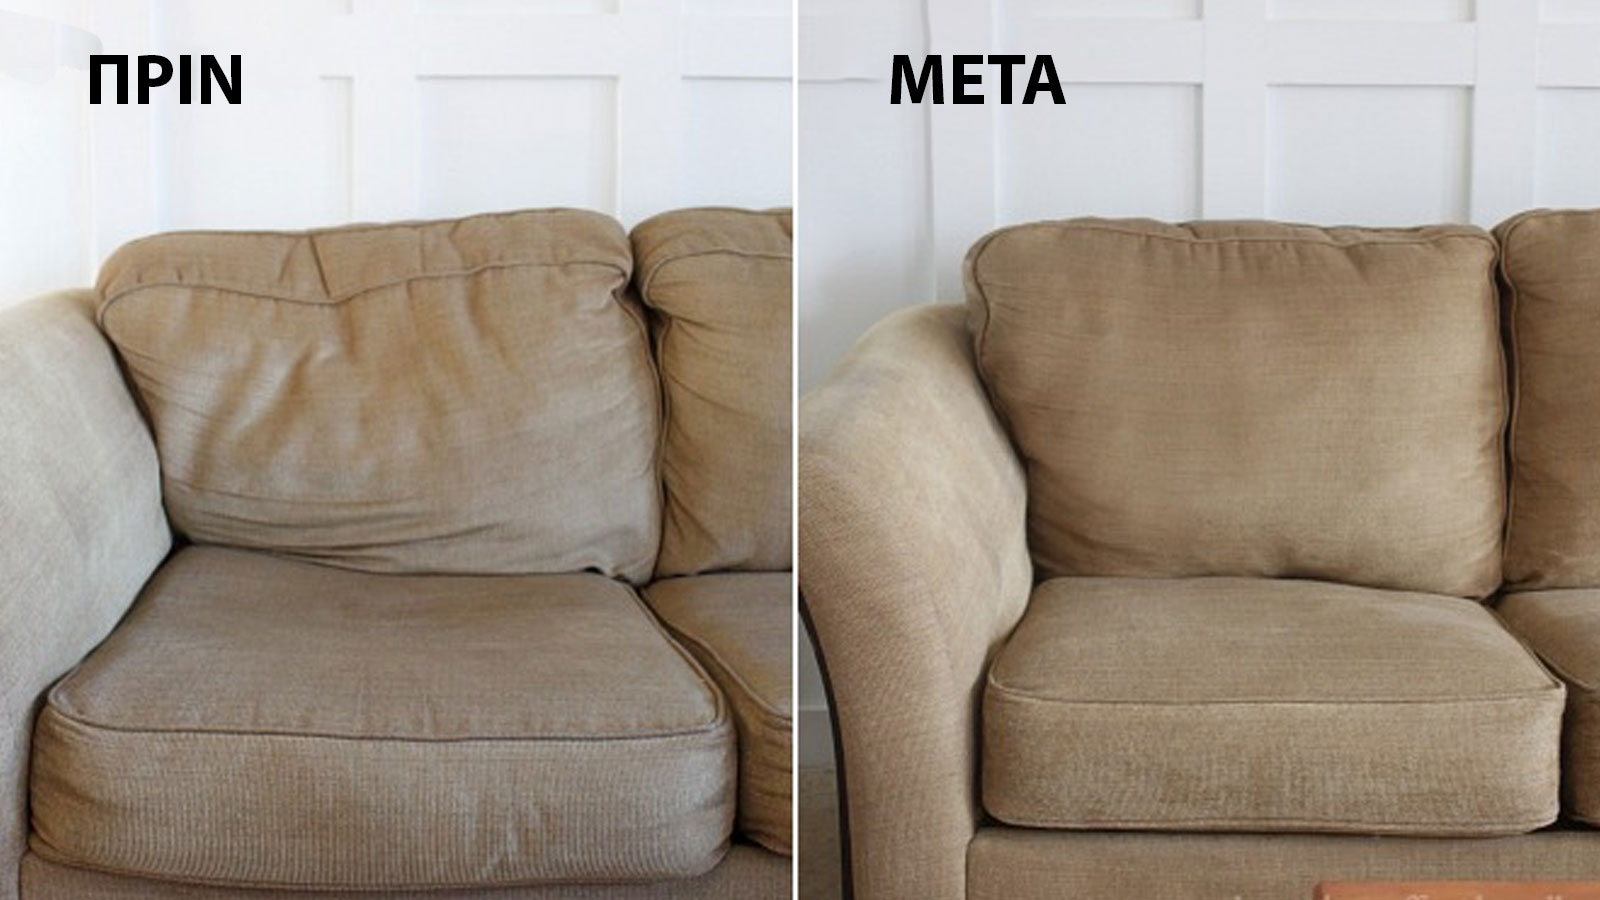 https://loveoffamilyandhome.net/2014/02/saggy-couch-solutions.html